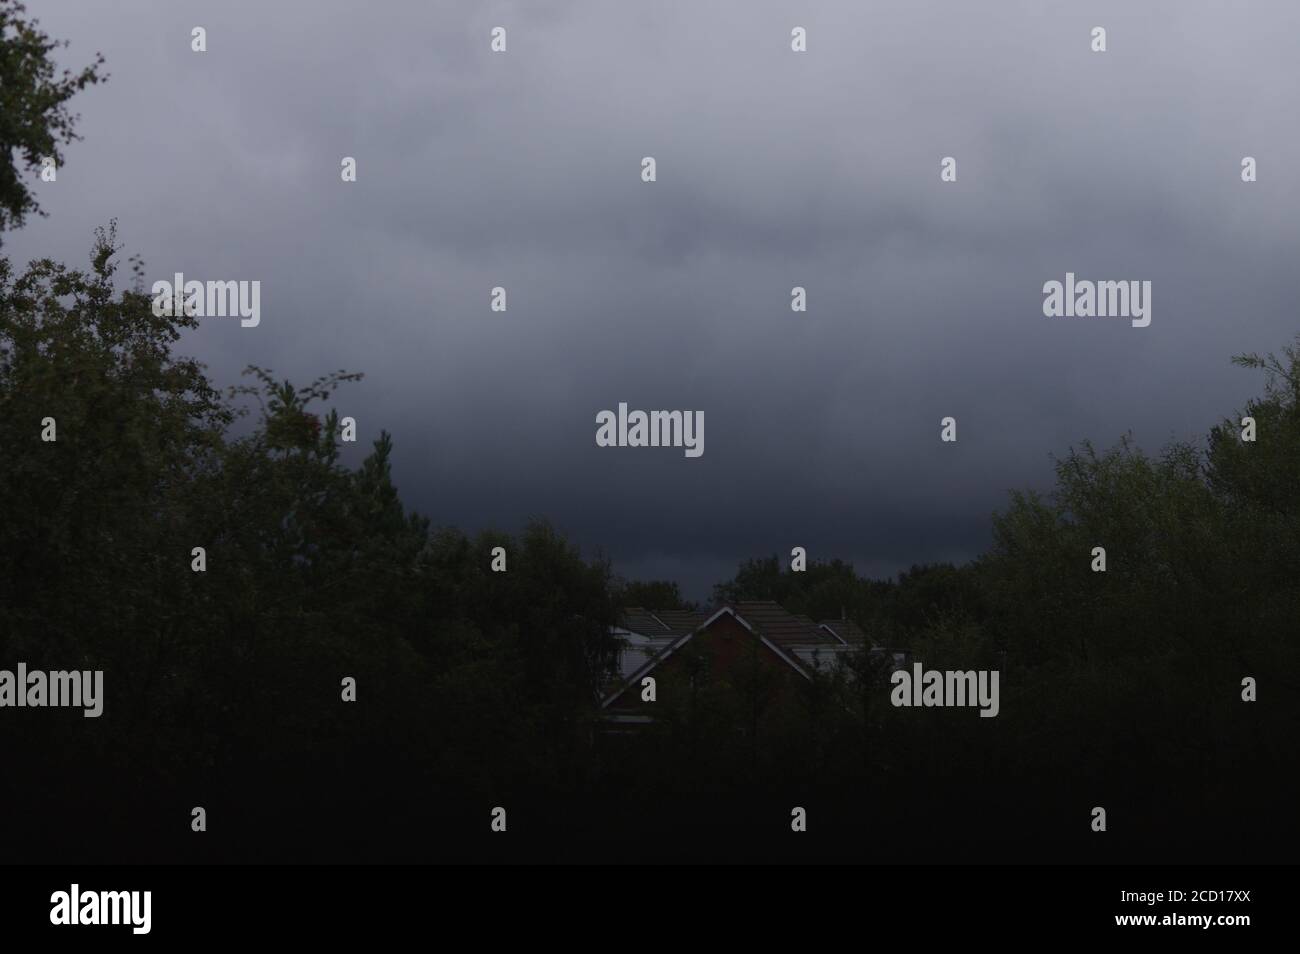 Dark stormy landscape view with copy space Stock Photo